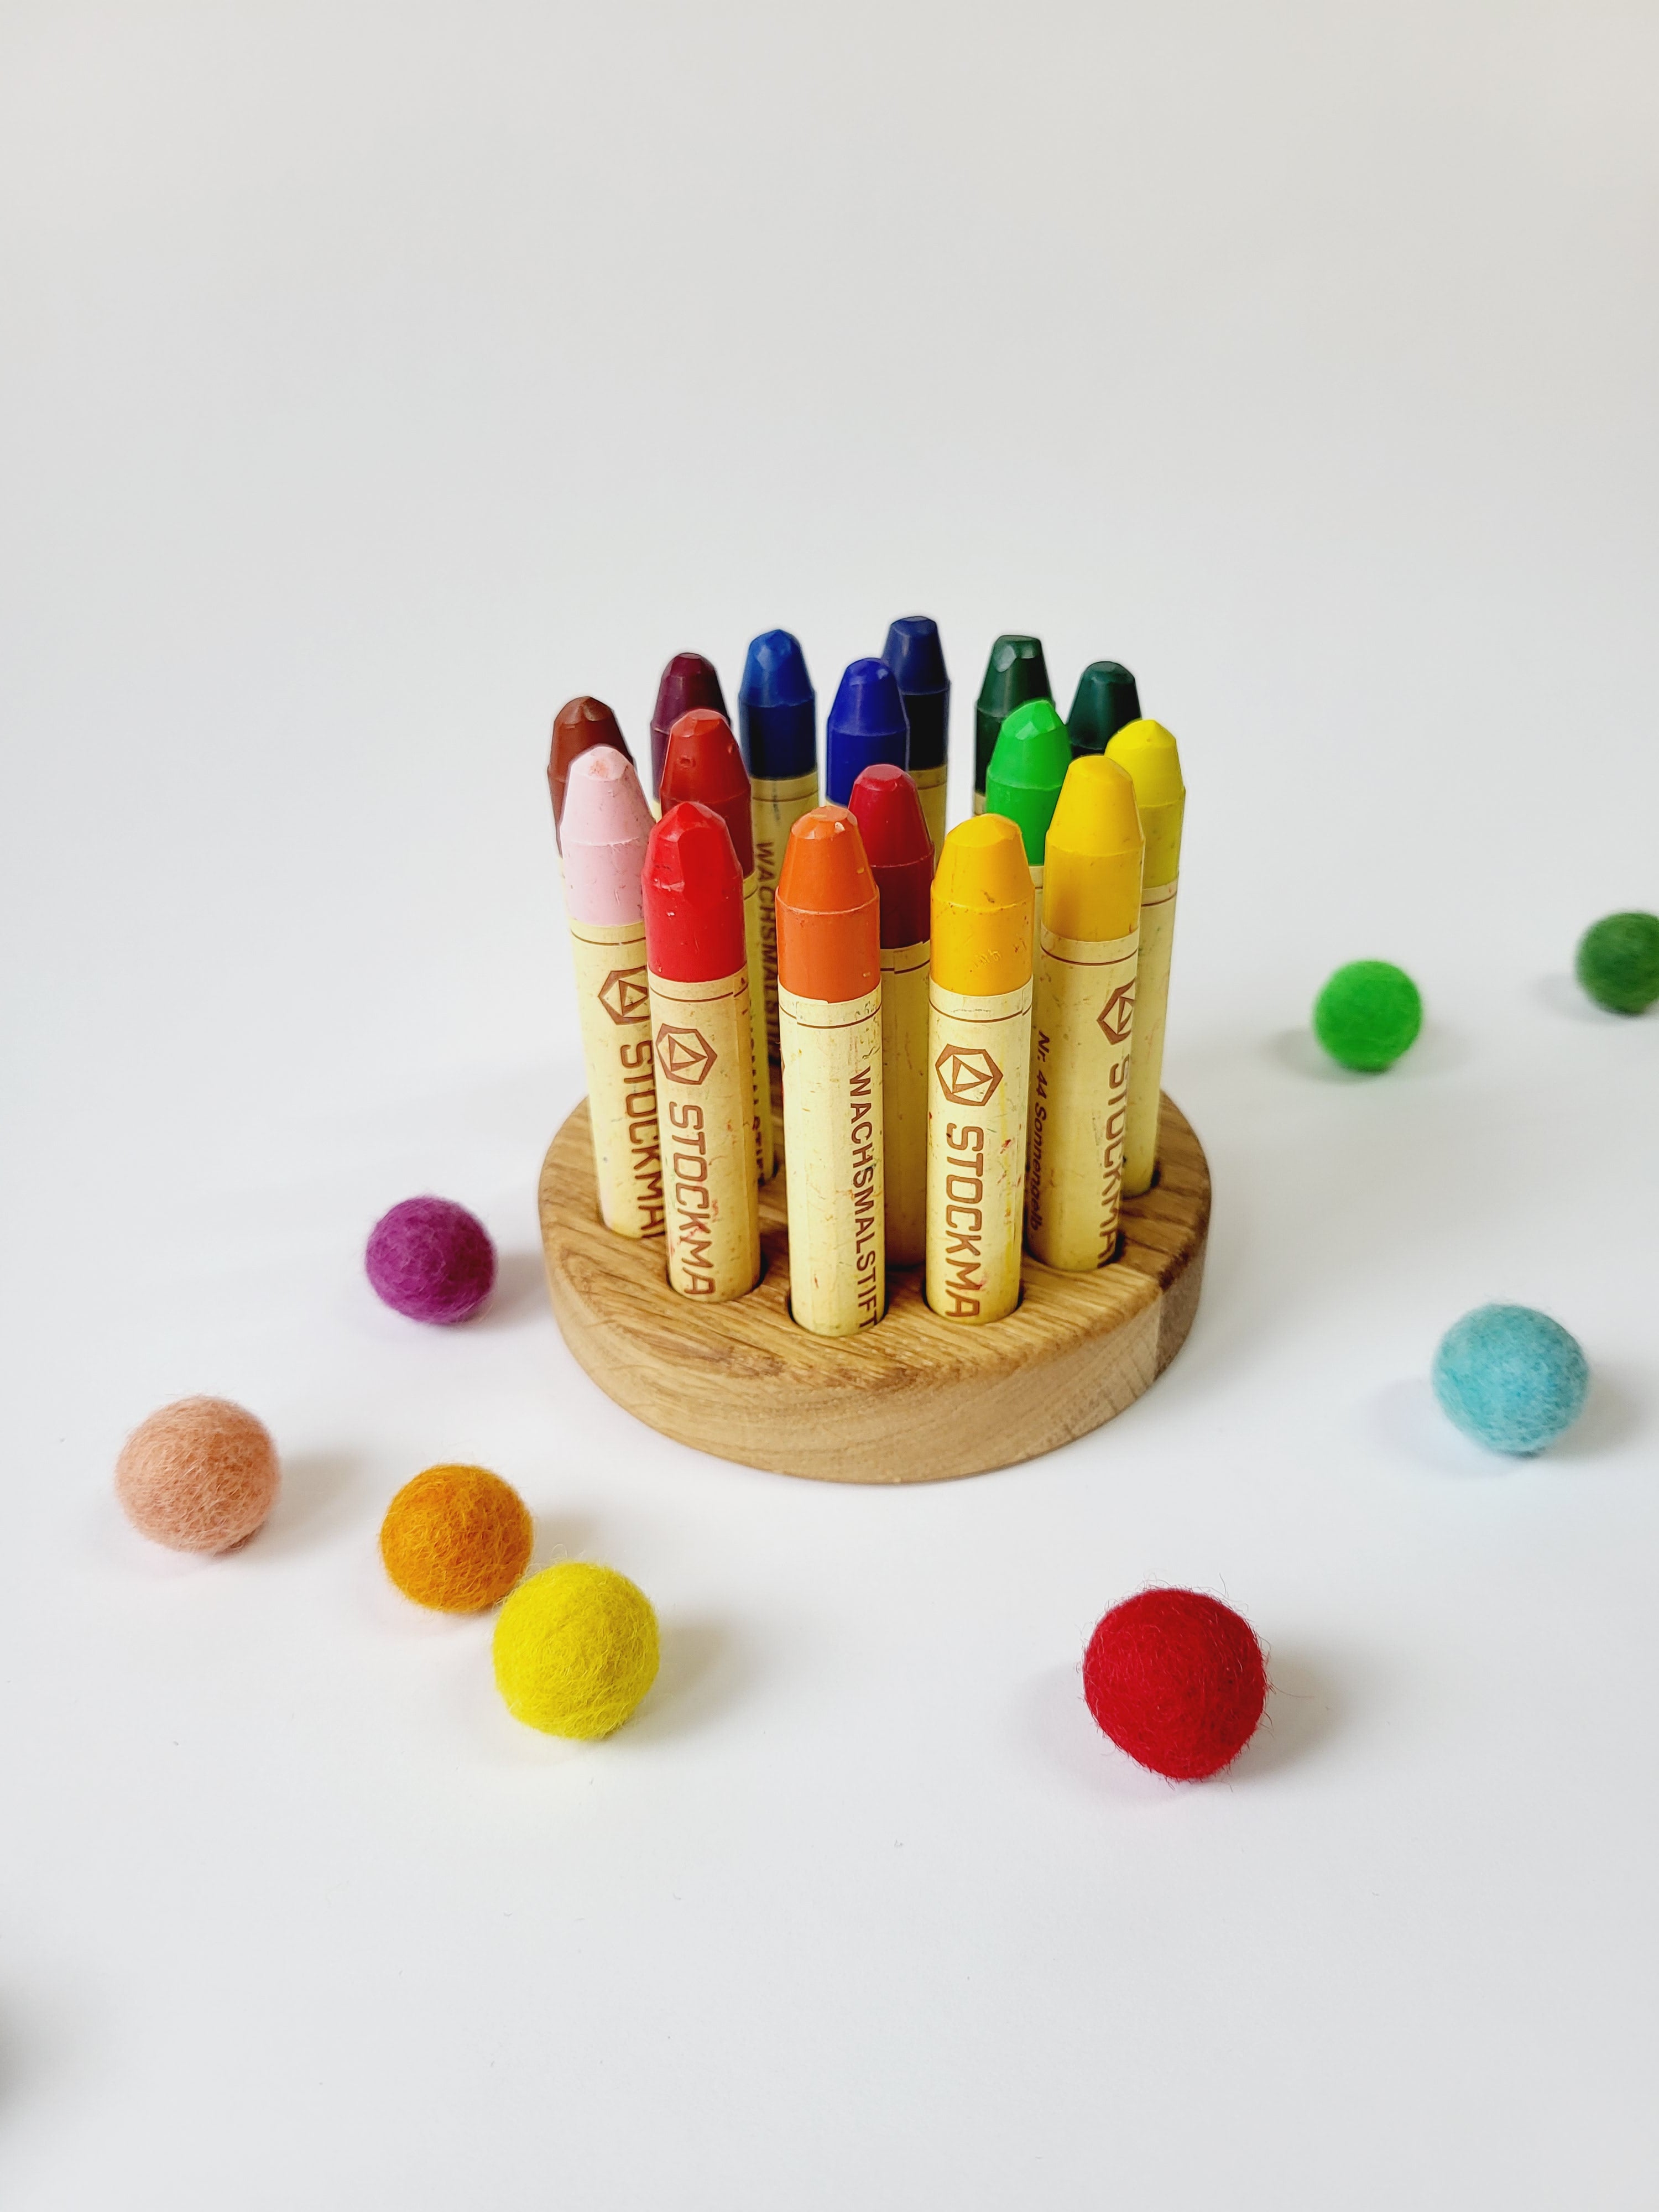 Stockmar Rectangular Crayon Holder for 12 Sticks Desk Organization Waldorf  School Personalized Gift for Kids Wooden Holder Without Crayons 